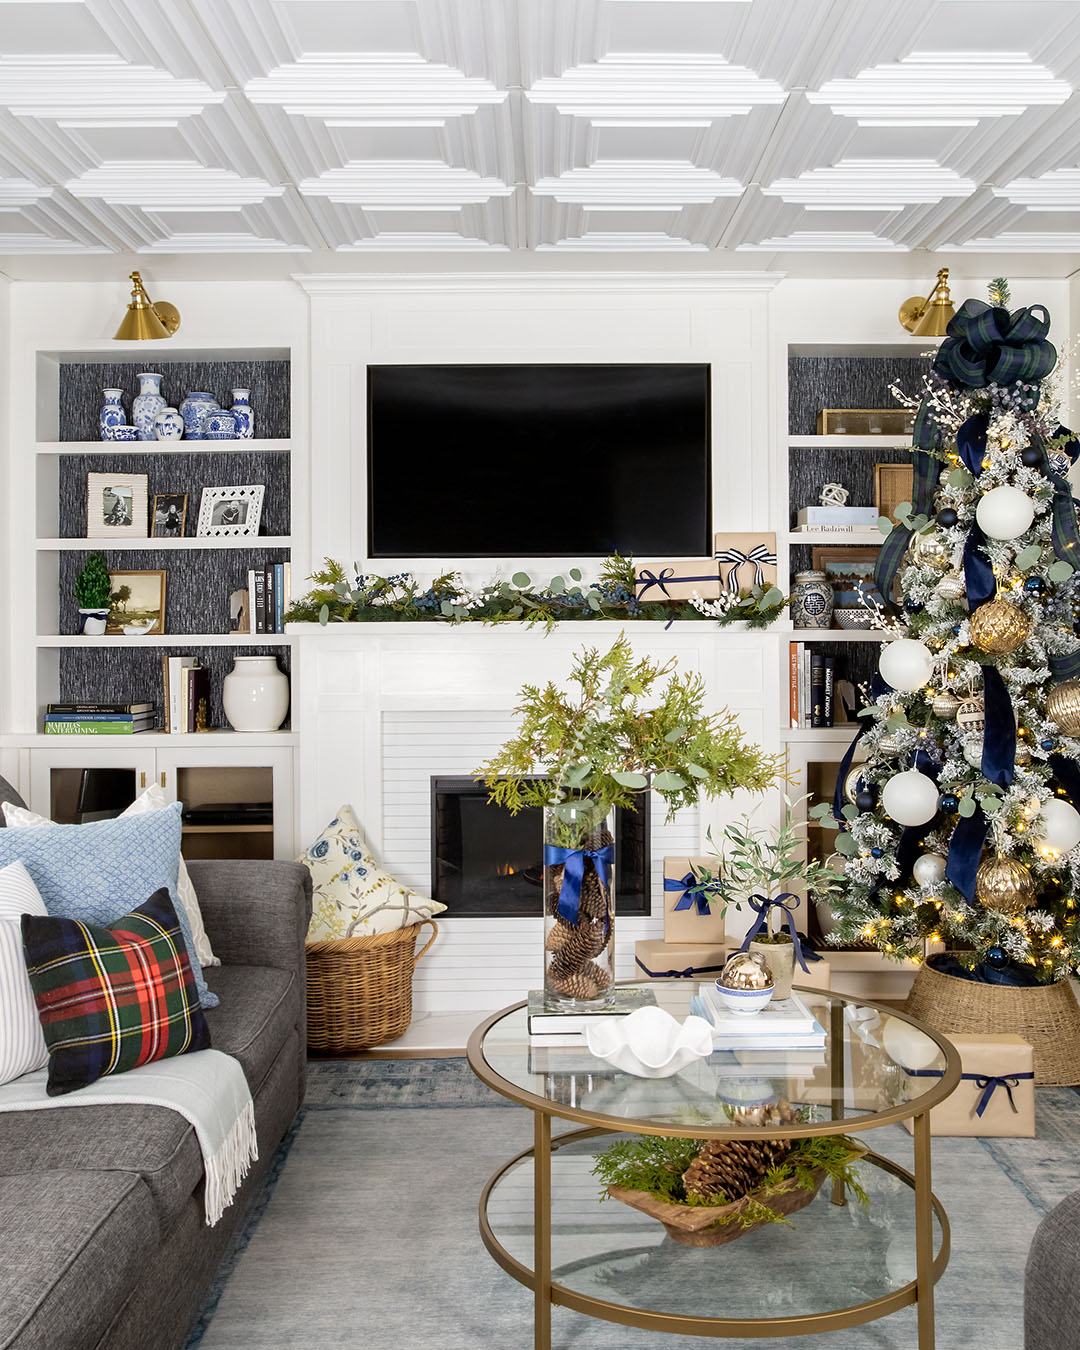 The first tree is up and it's officially Christmas season in our house! Today I'm going to share my blue and white Christmas decor from our living room!